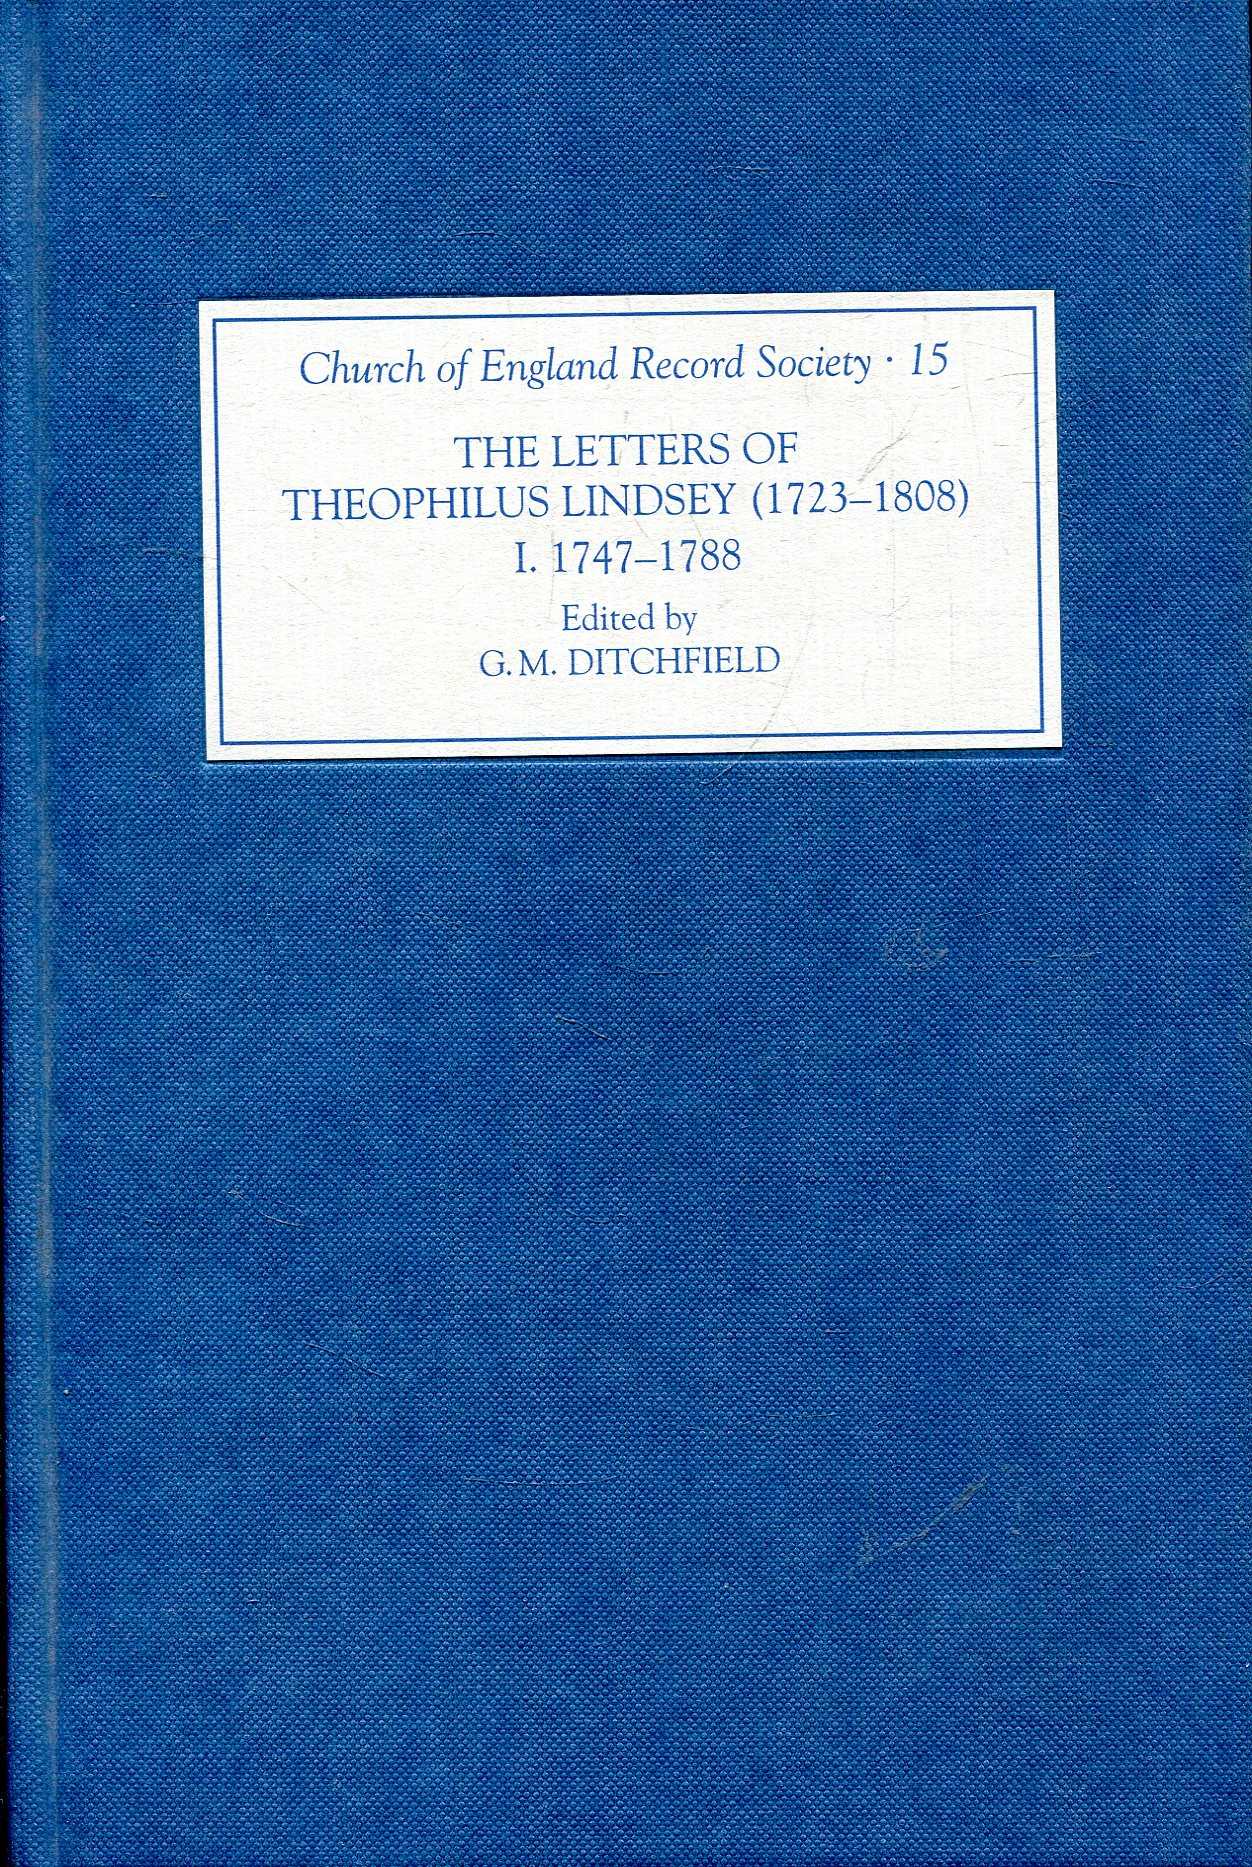 The Letters of Theophilus Lindsey (1723-1808): Volume I: 1747-1788 (Church of England Record Society volume 15) - Ditchfield, G.M. (editor)